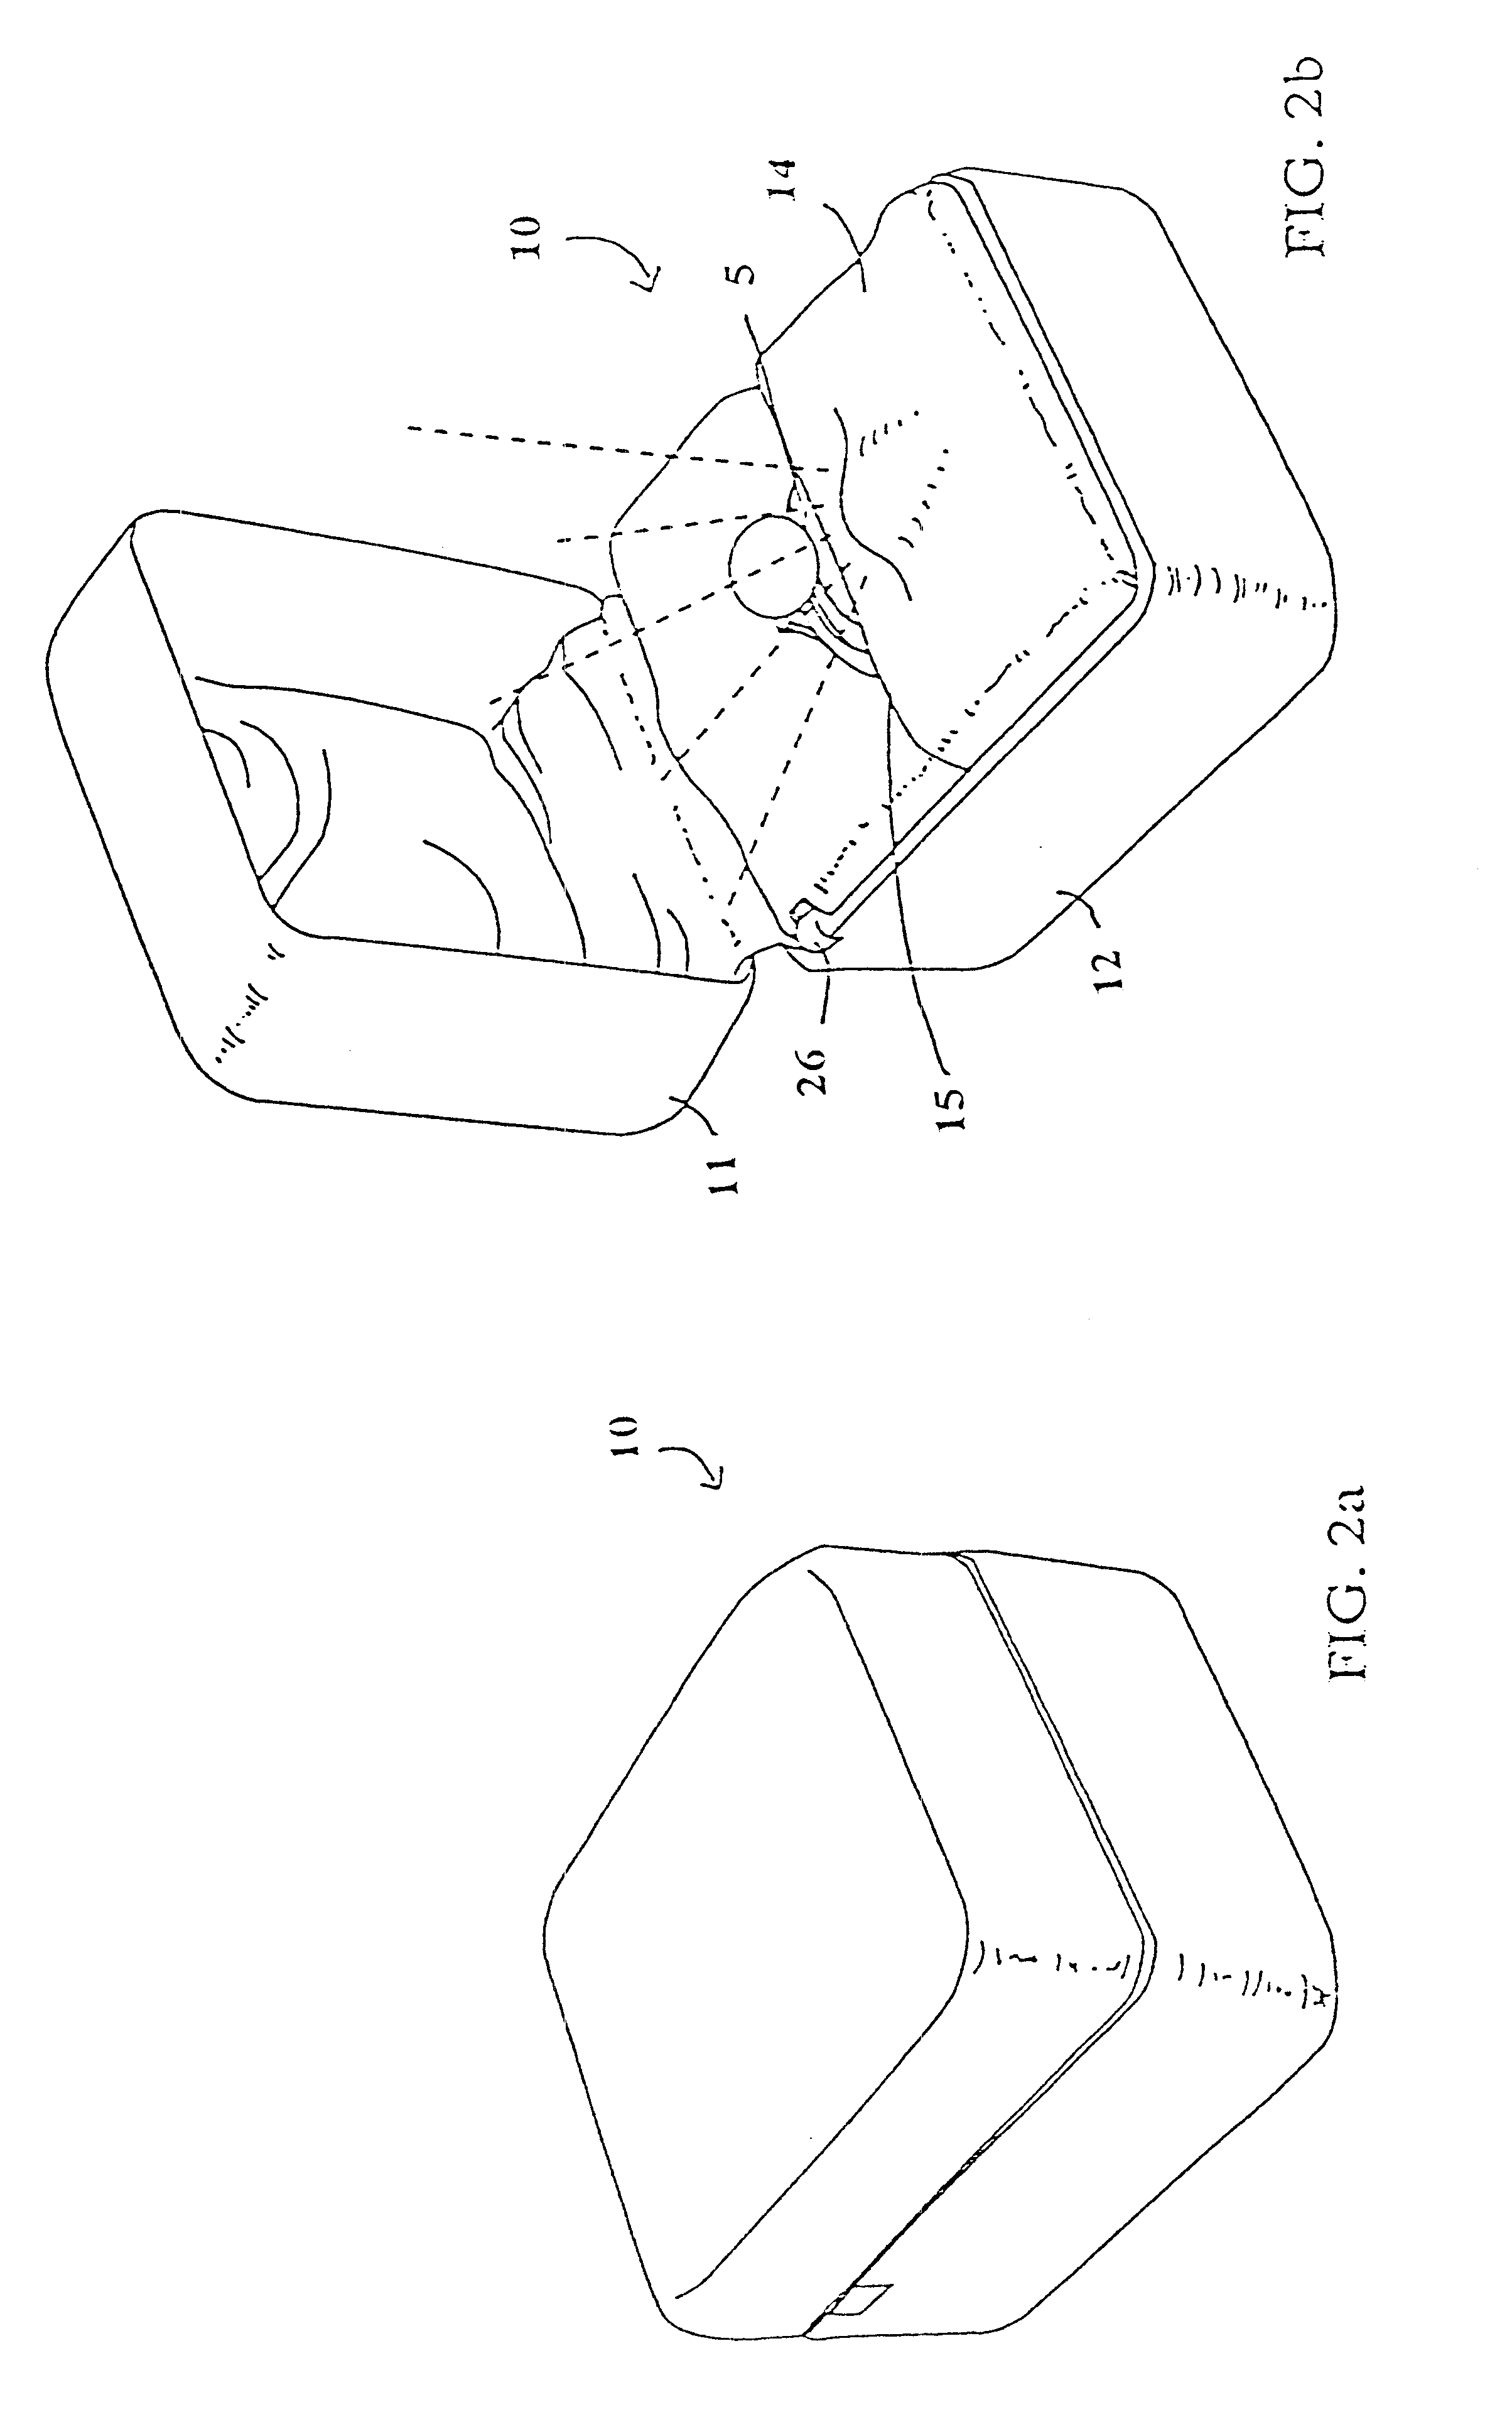 Jewelry enhancing lighting device and process